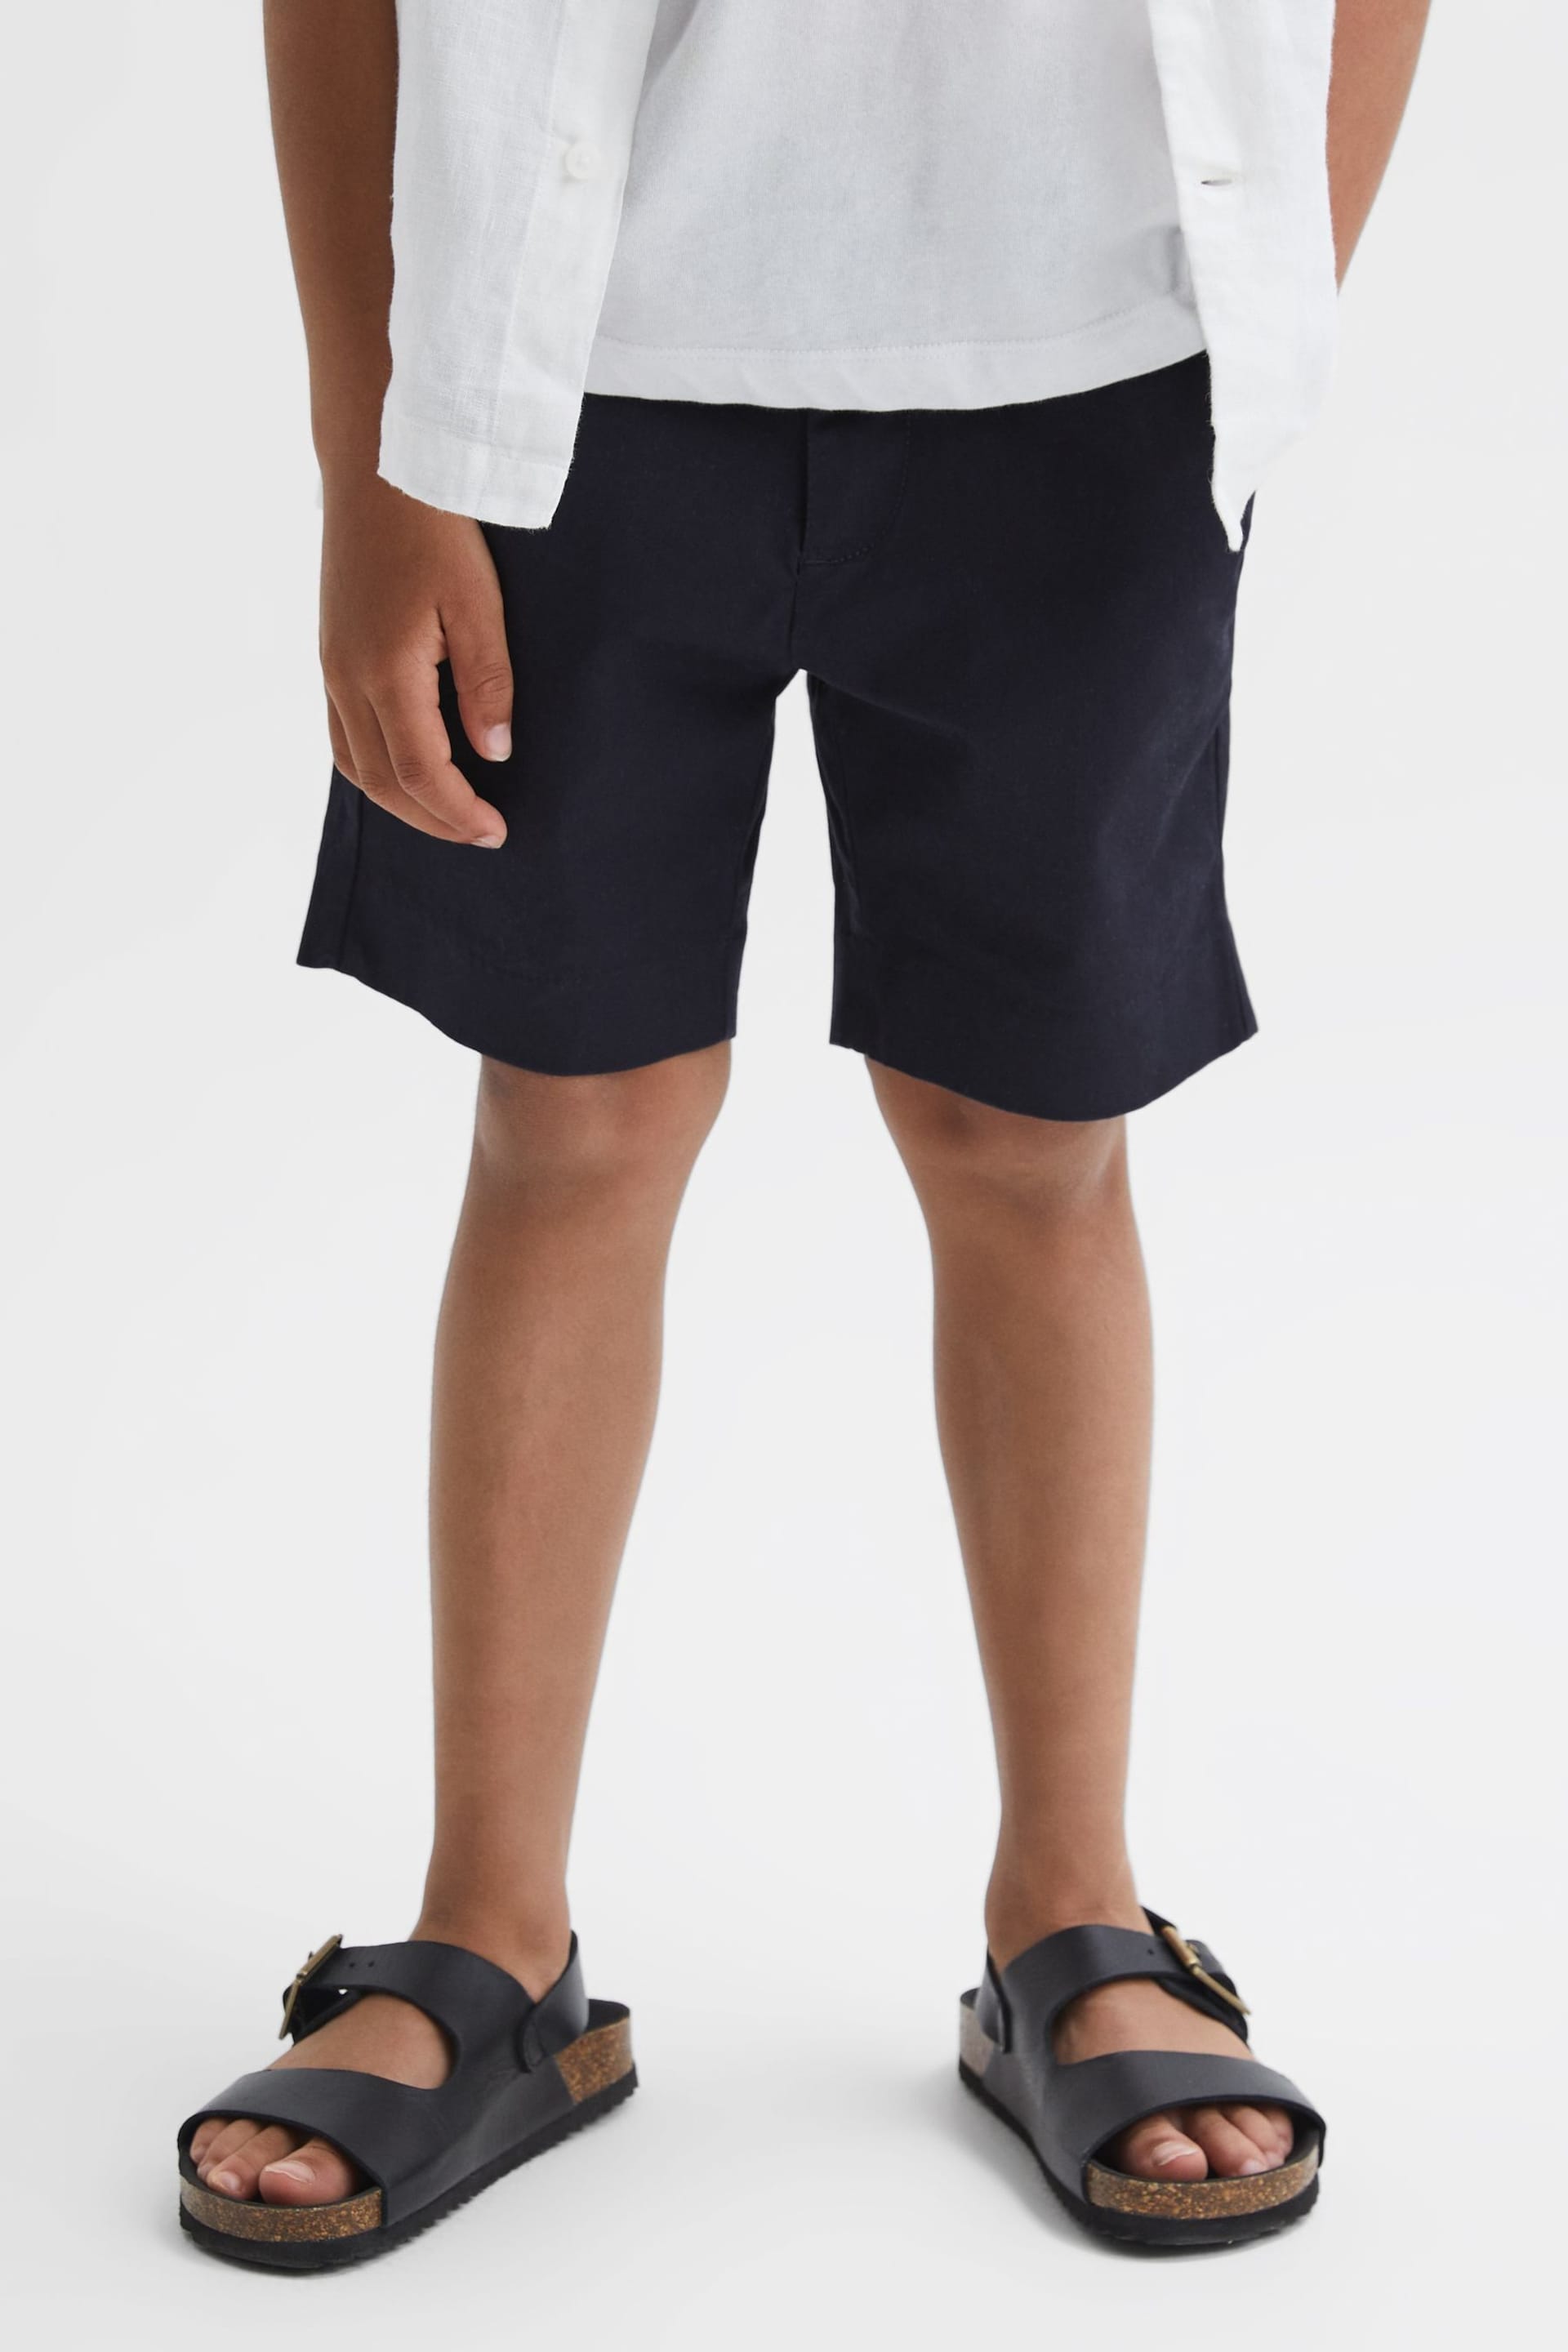 Reiss Navy Wicket Junior Casual Chino Shorts - Image 3 of 5